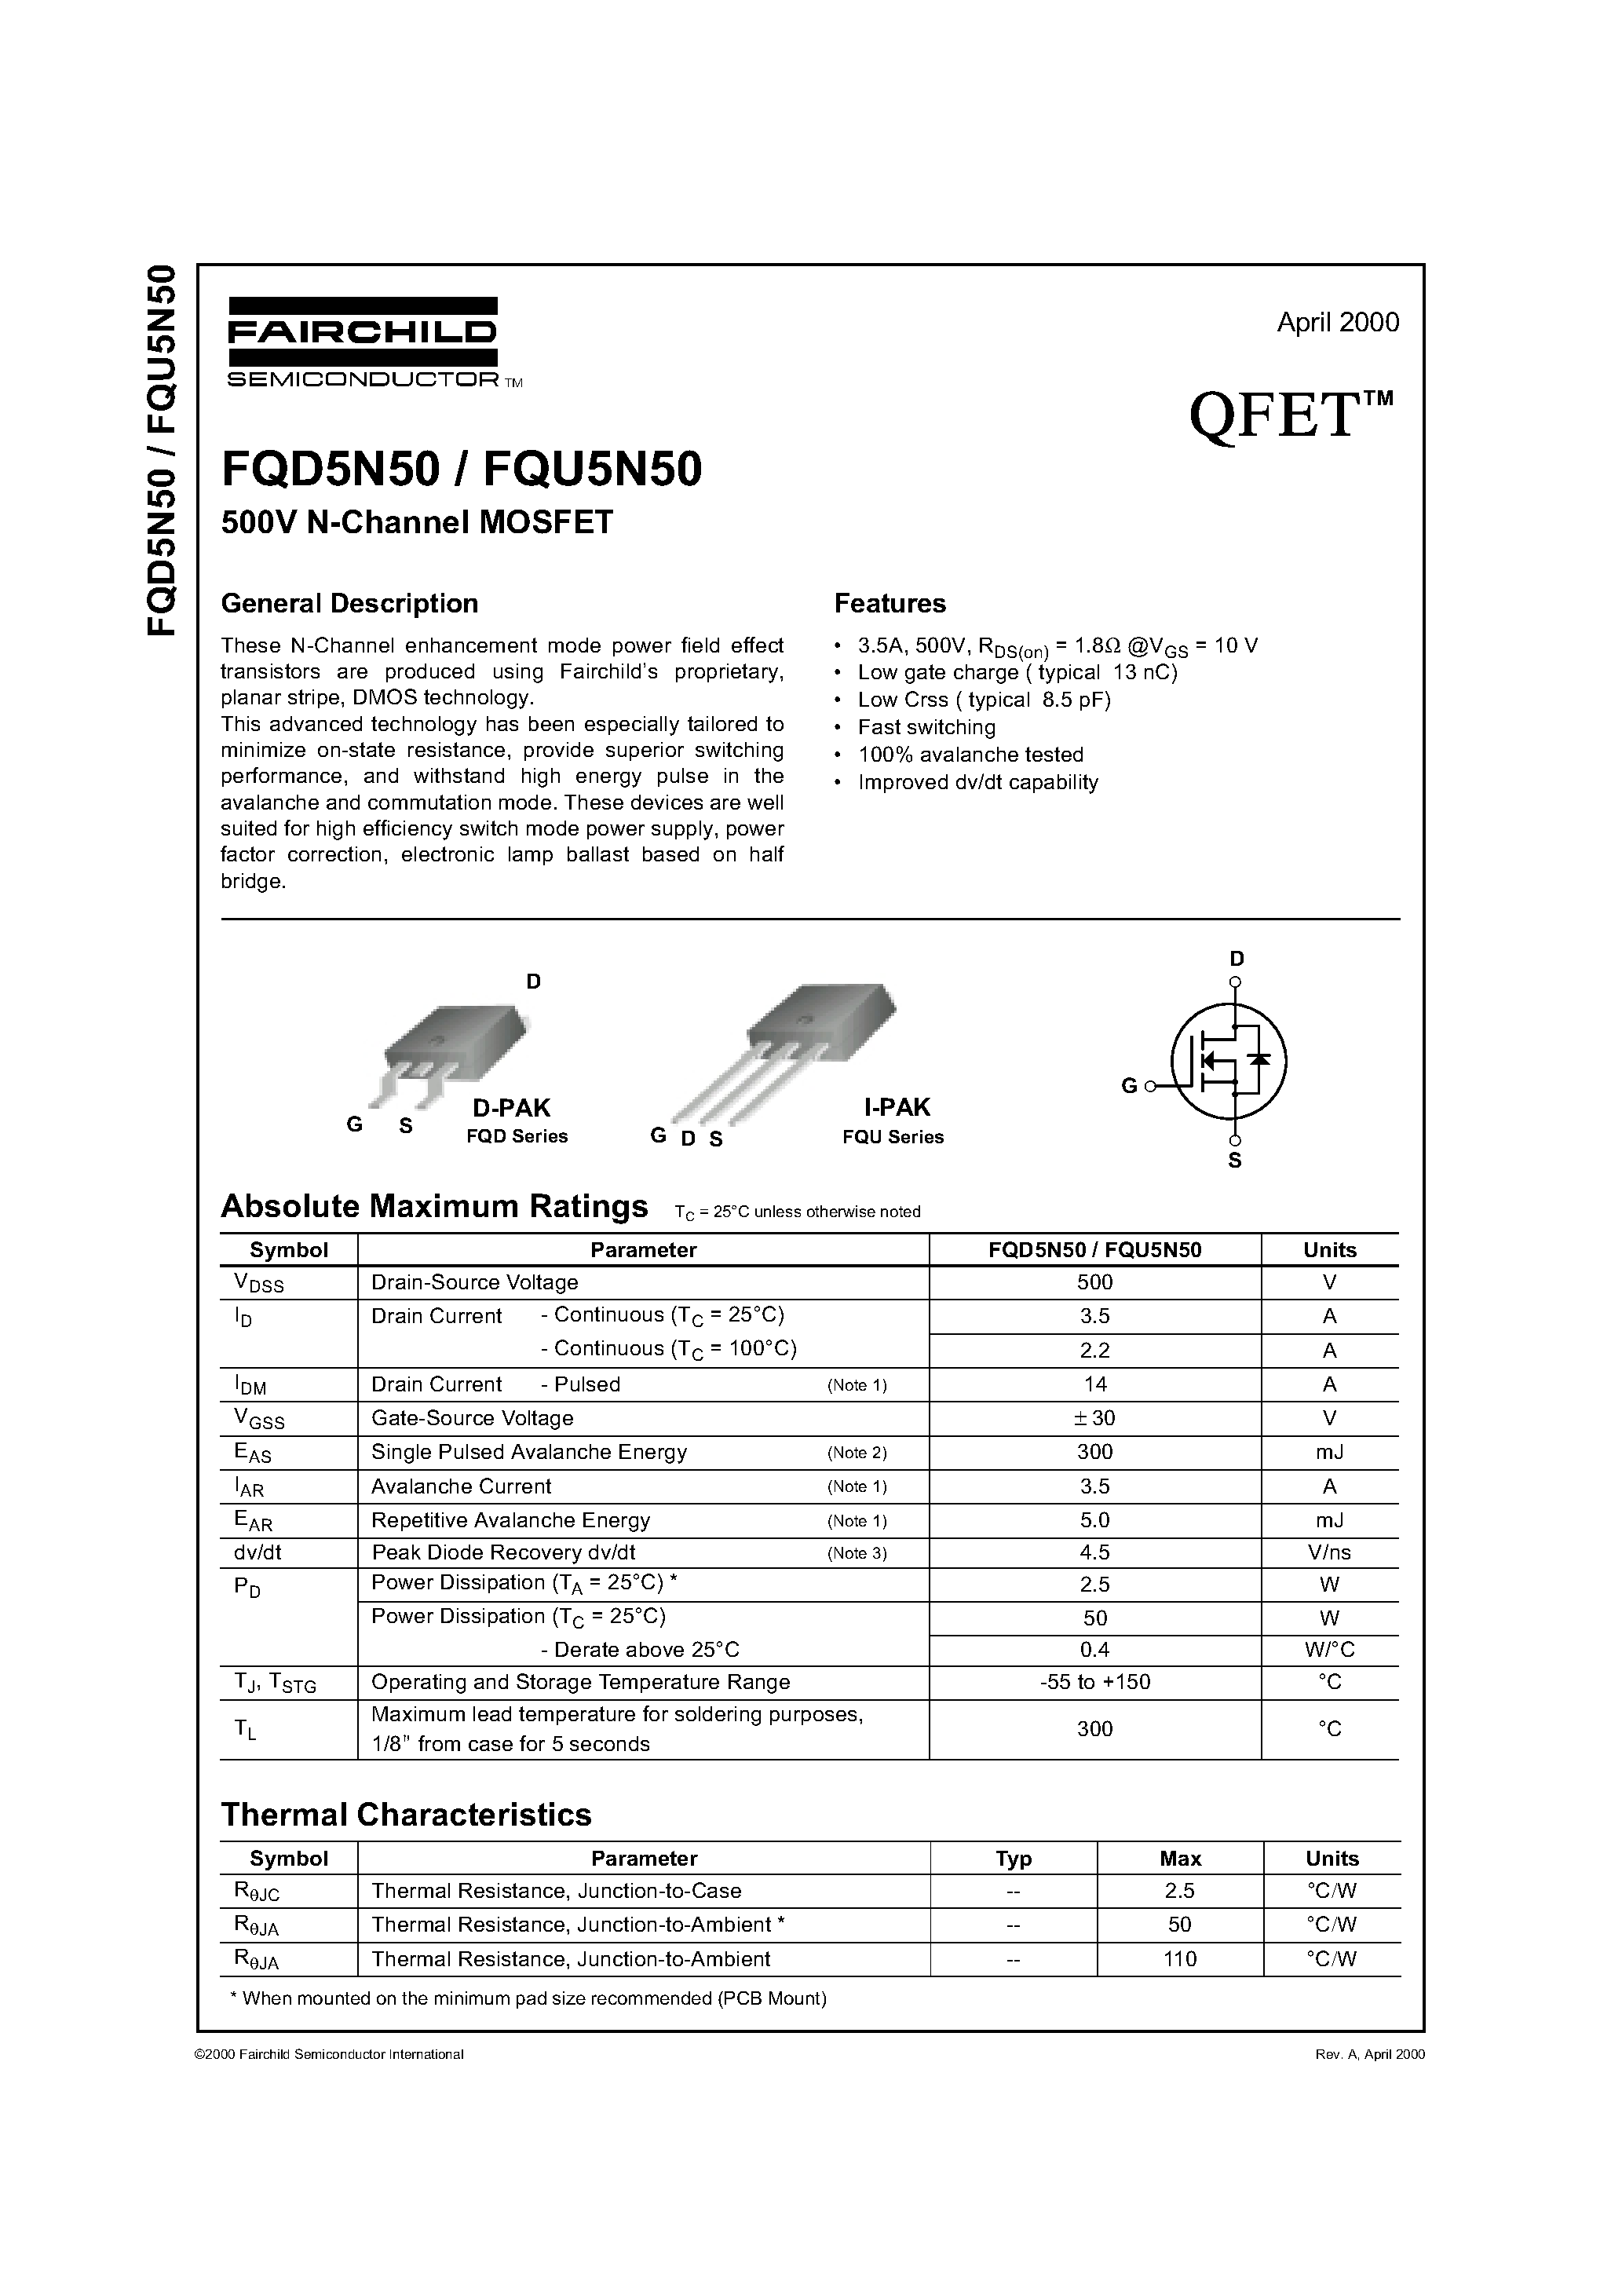 Datasheet FQD5N50 - 500V N-Channel MOSFET page 1